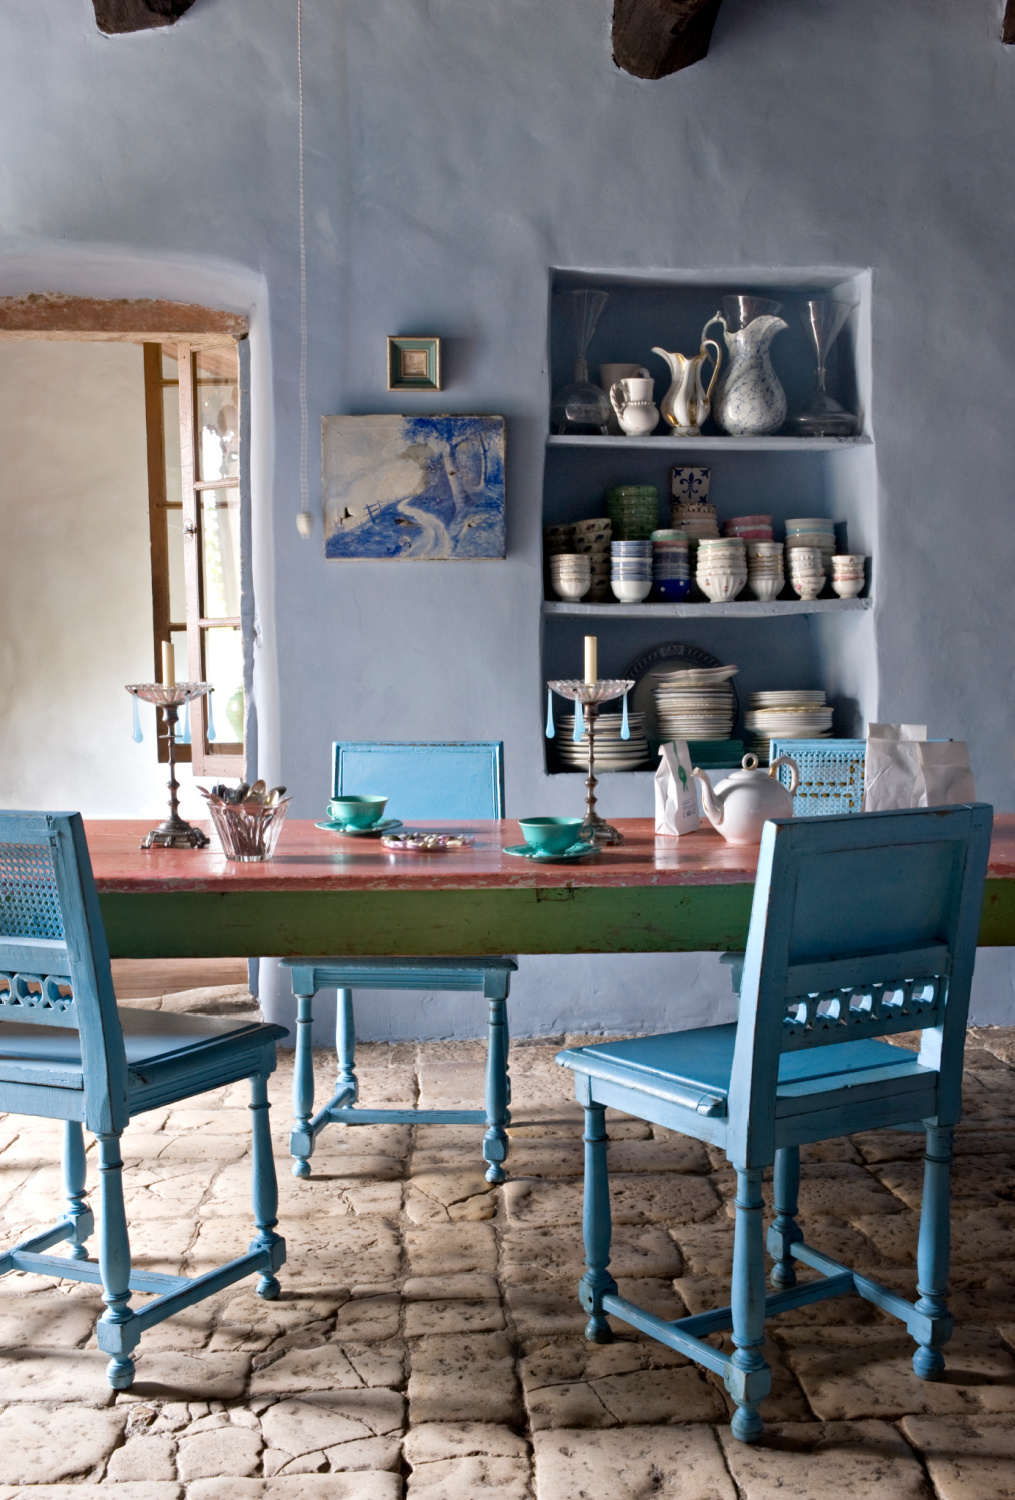 Blue grey plaster walls and bright French blue dining chairs play off each other in a charming monochromatic French provincial interior with rustic stone floor. Shauna Varvel's PROVENCE STYLE. #interiordesign #frenchcountry #oldworldstyle